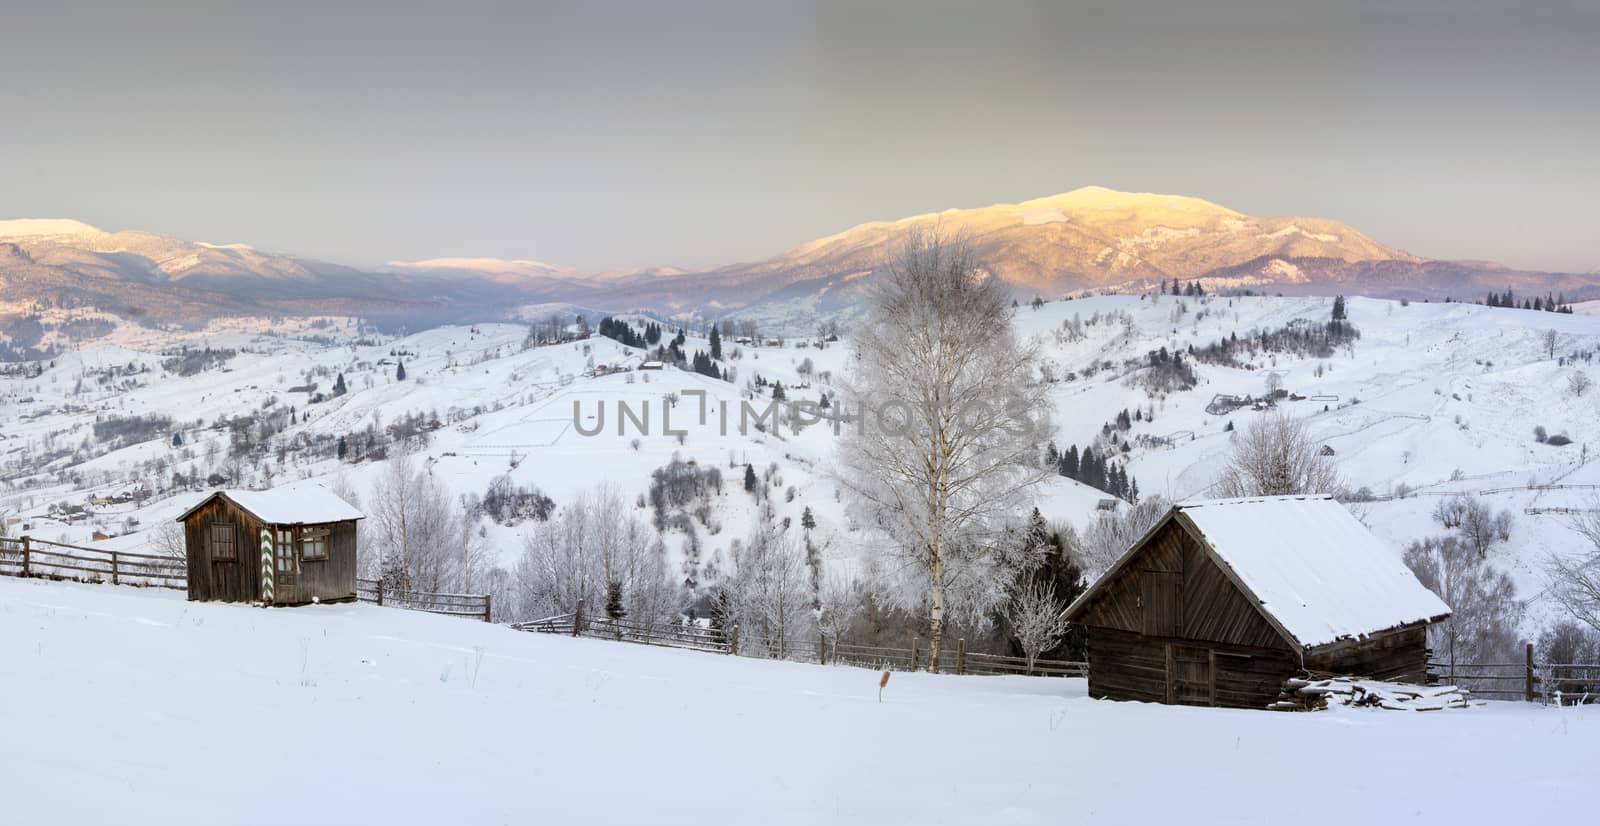 Carpathian mountain valley covered with fresh snow. Majestic landscape. Ukraine, Europe